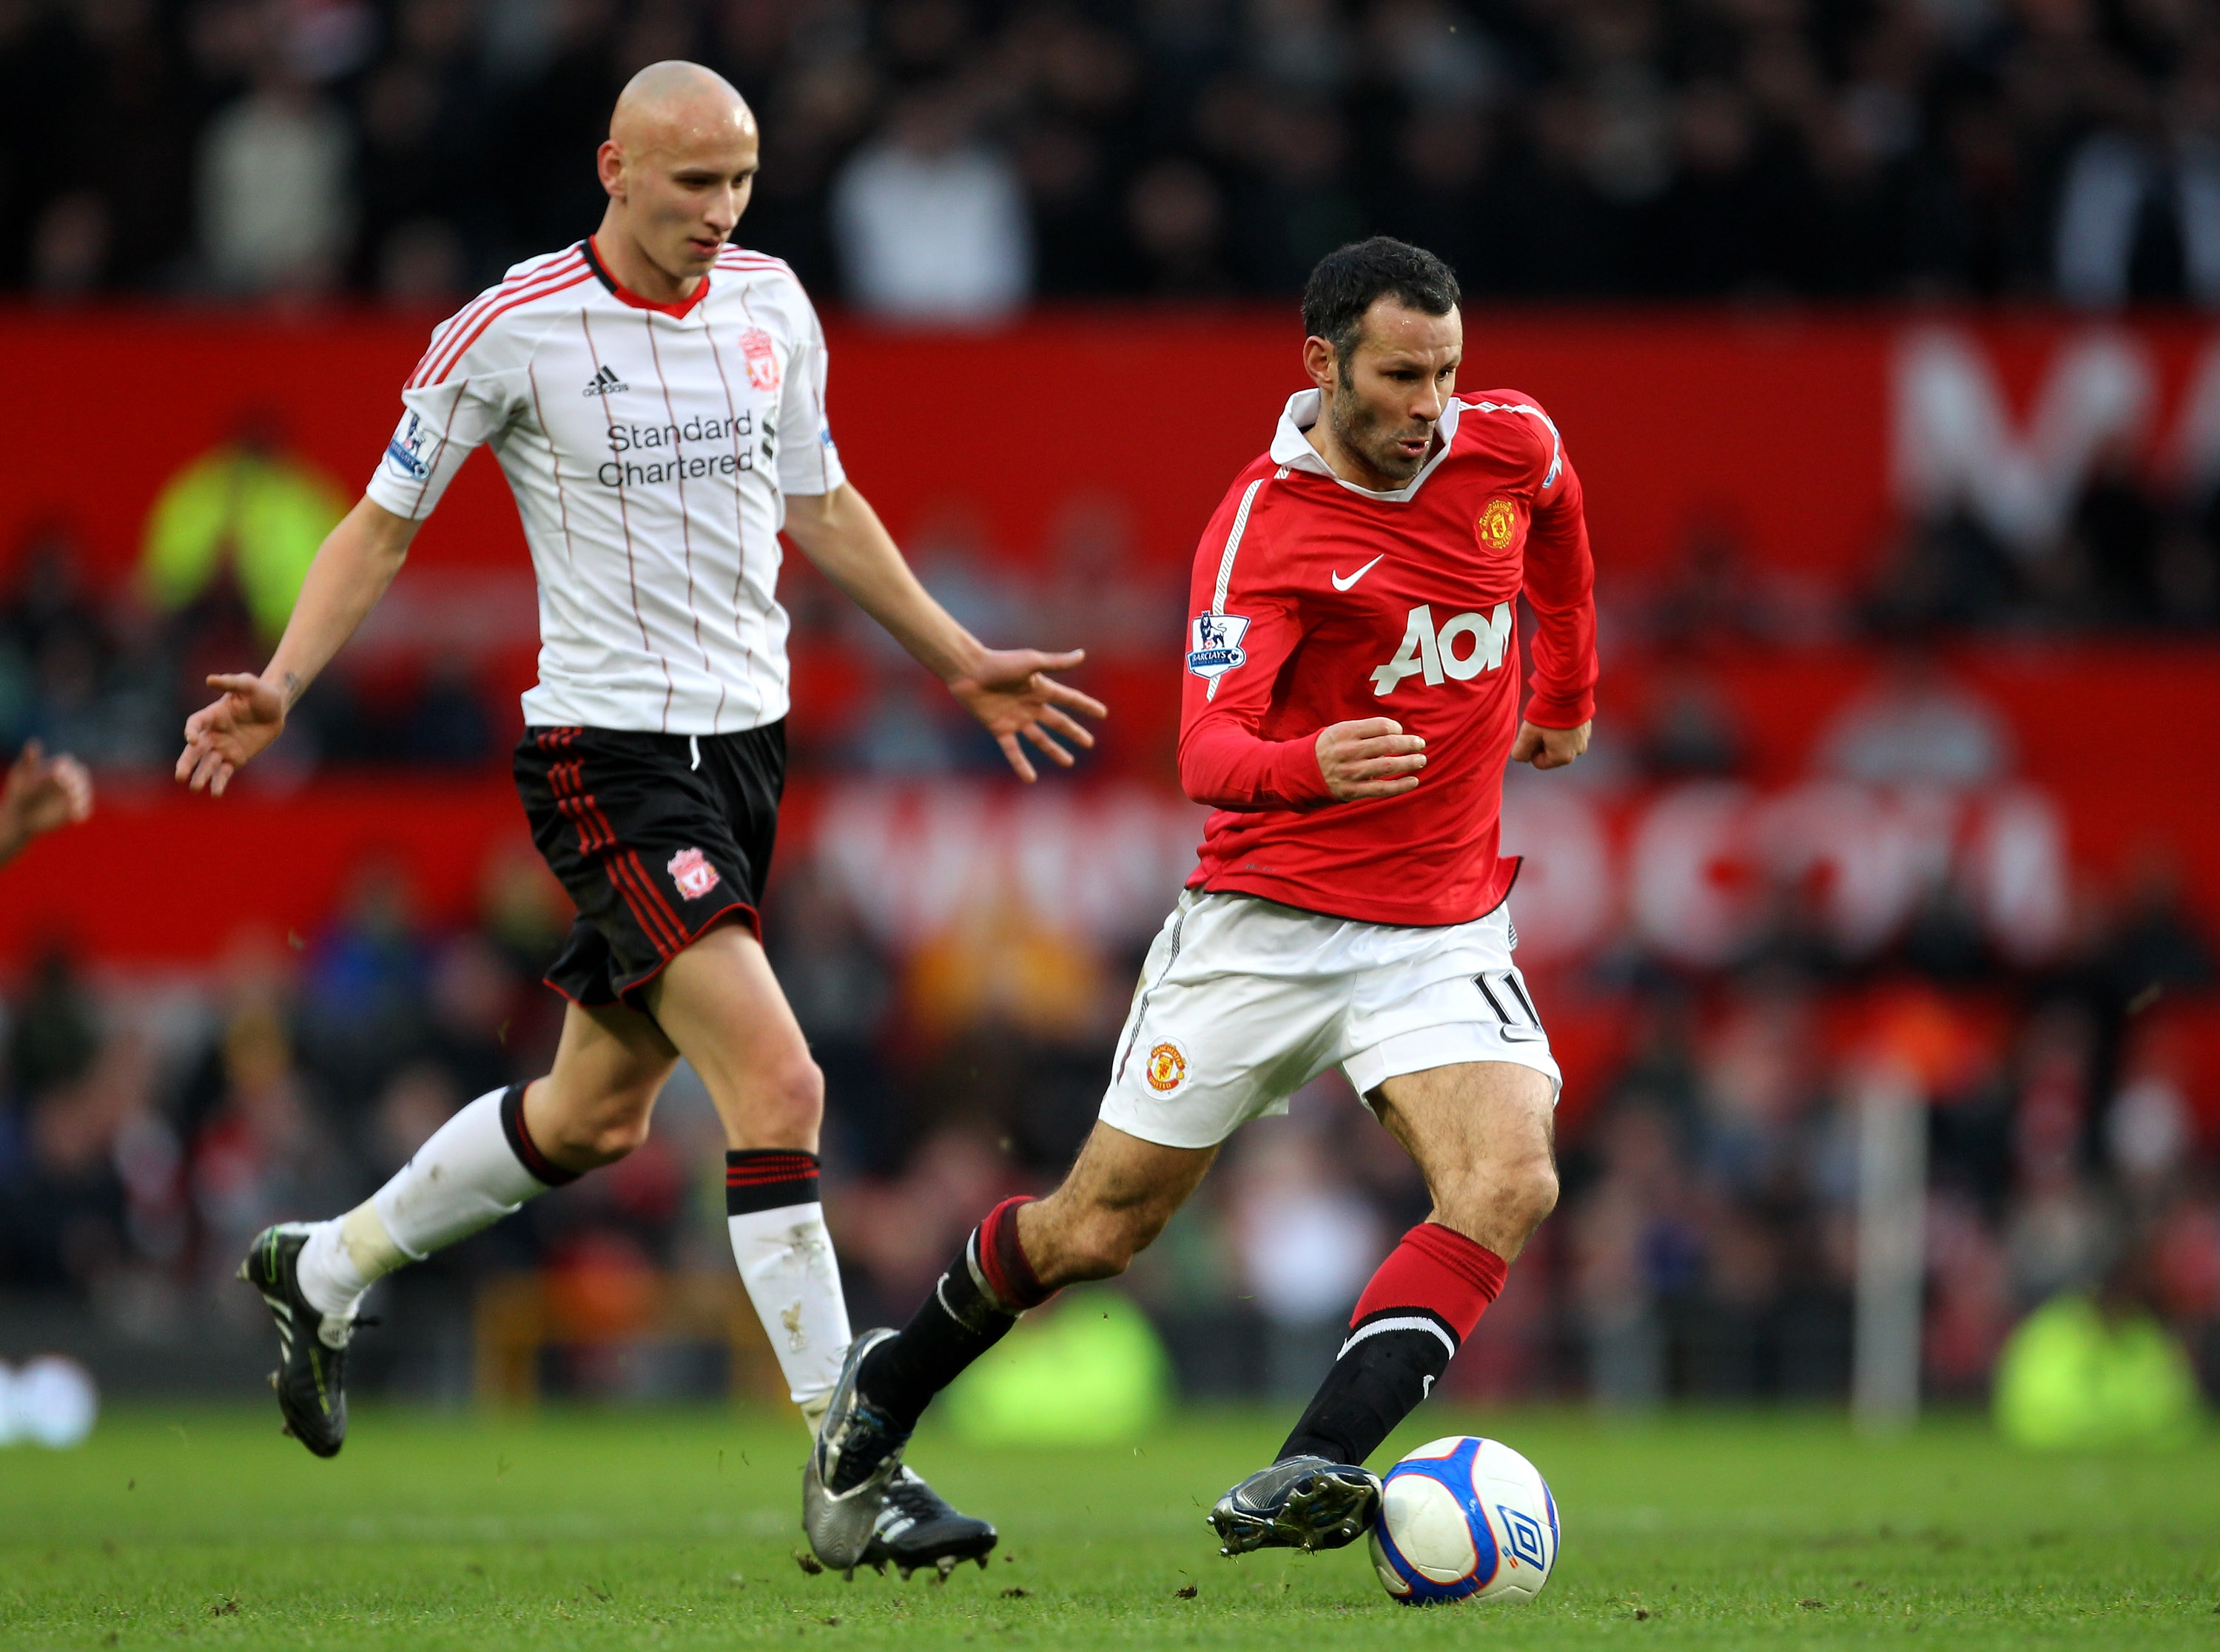 MANCHESTER, ENGLAND - JANUARY 09:  Ryan Giggs of Manchester United goes past Jonjo Shelvey of Liverpool during the FA Cup sponsored by E.ON 3rd round match between Manchester United and Liverpool at Old Trafford on January 9, 2011 in Manchester, England.